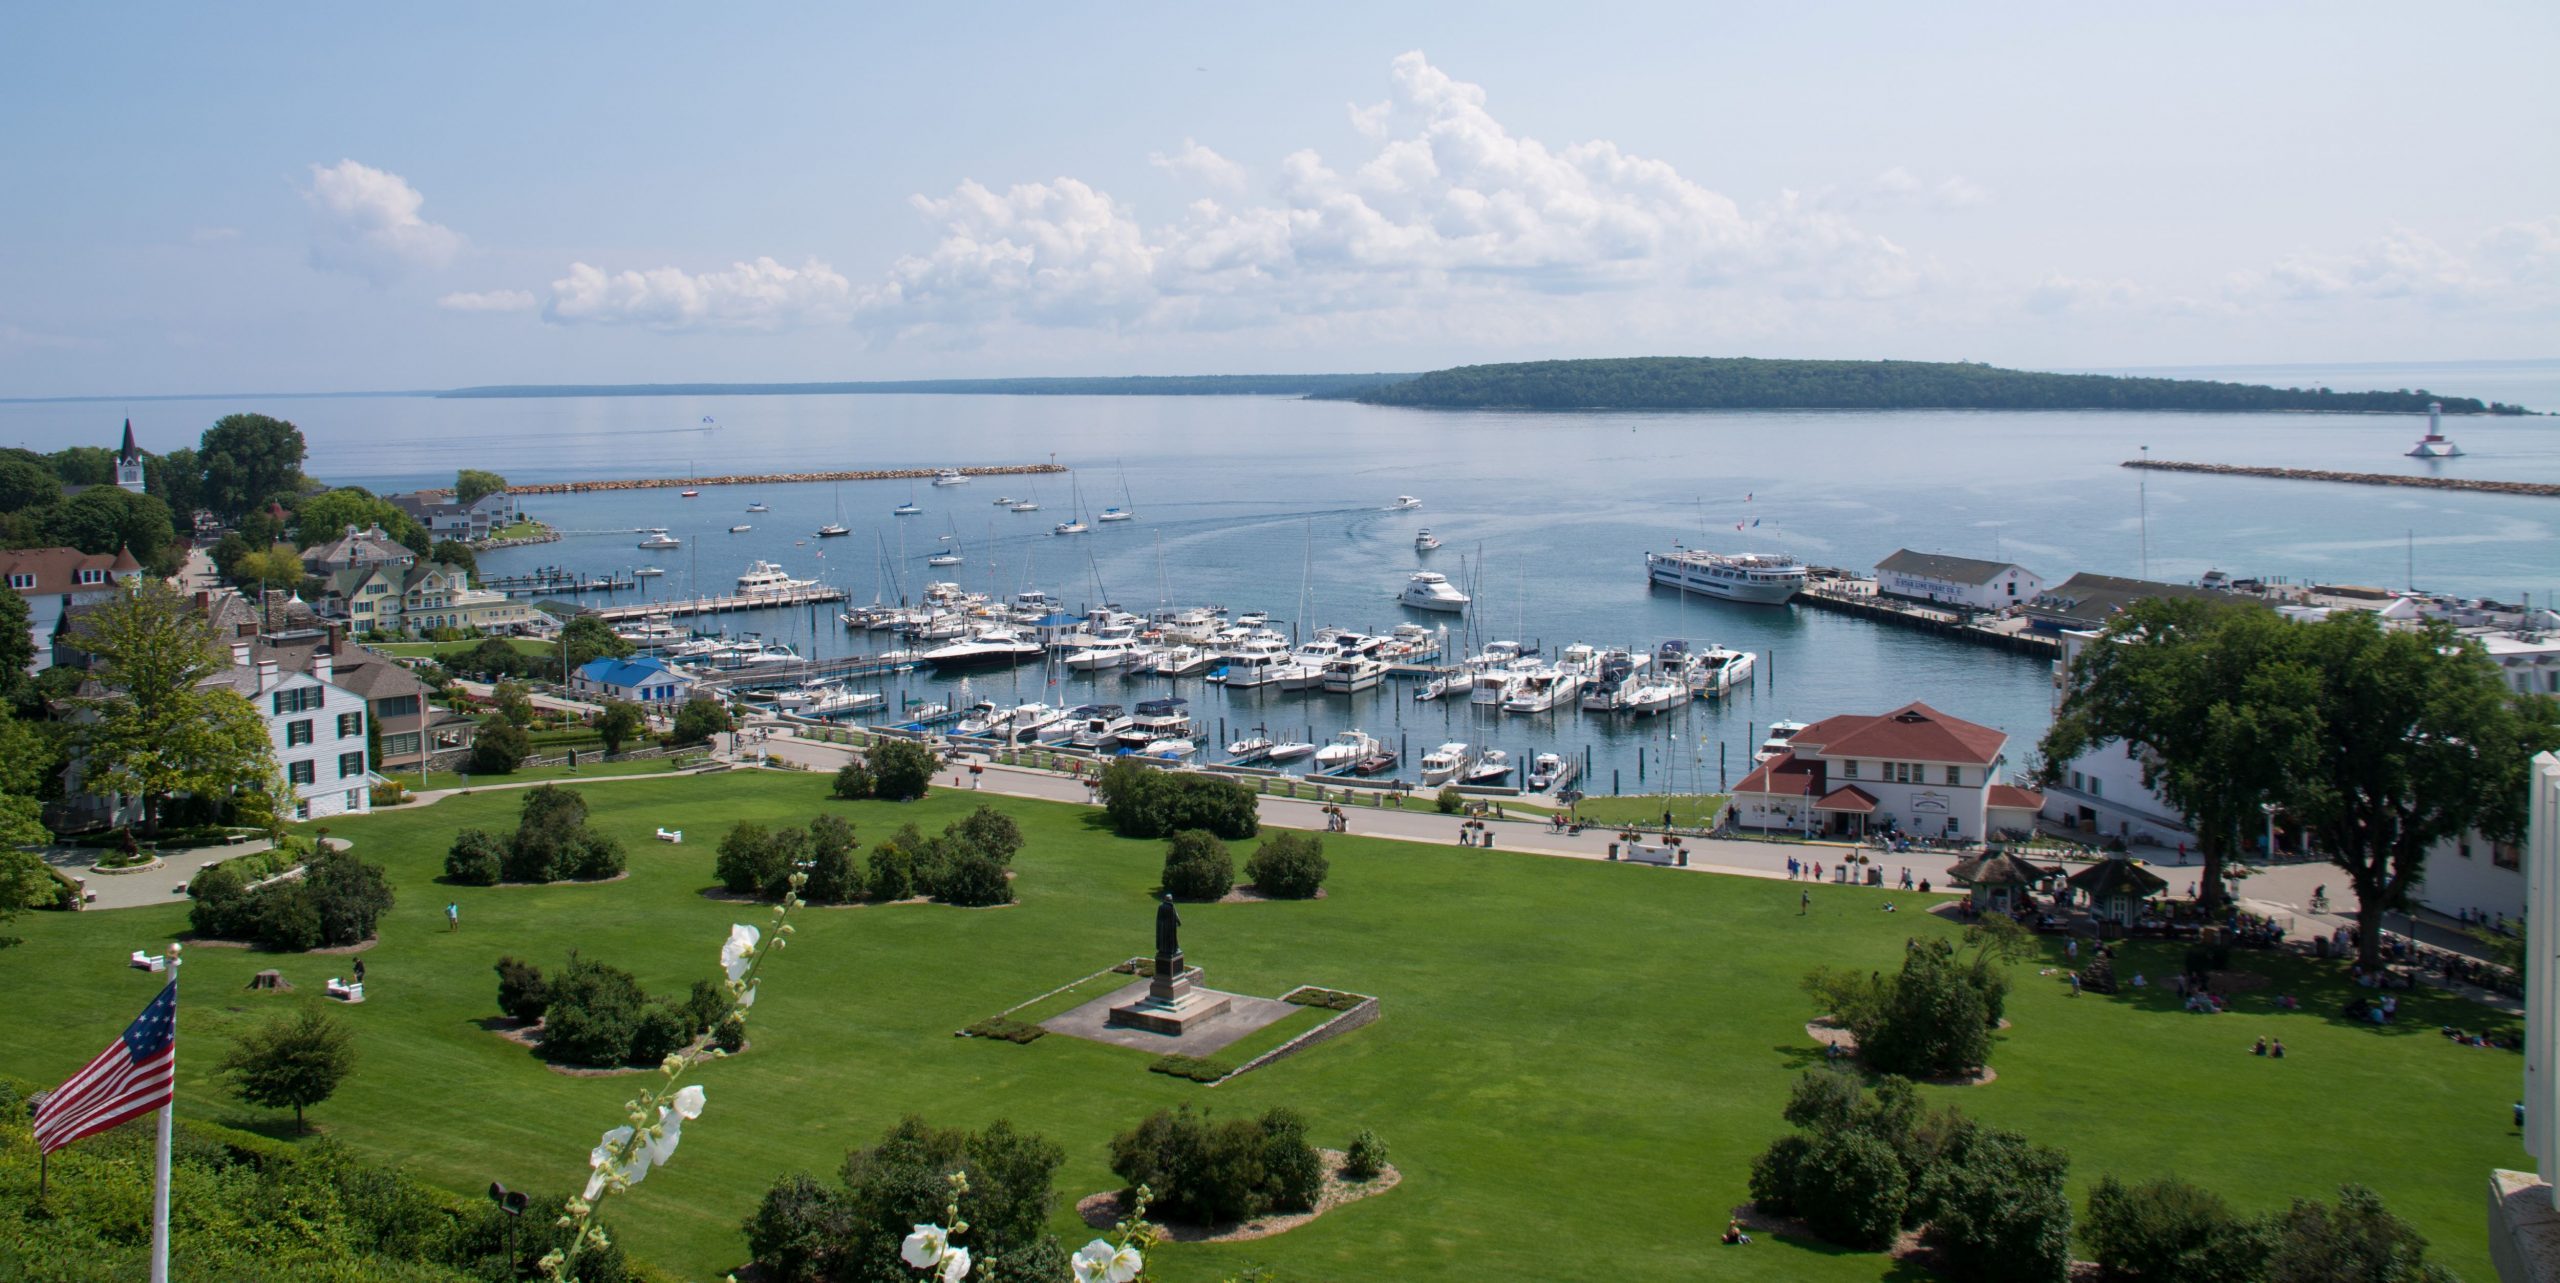 Mackinac Island harbor sits at the foot of Fort Mackinac across from Marquette Park with 80 boat slips in the public marina.